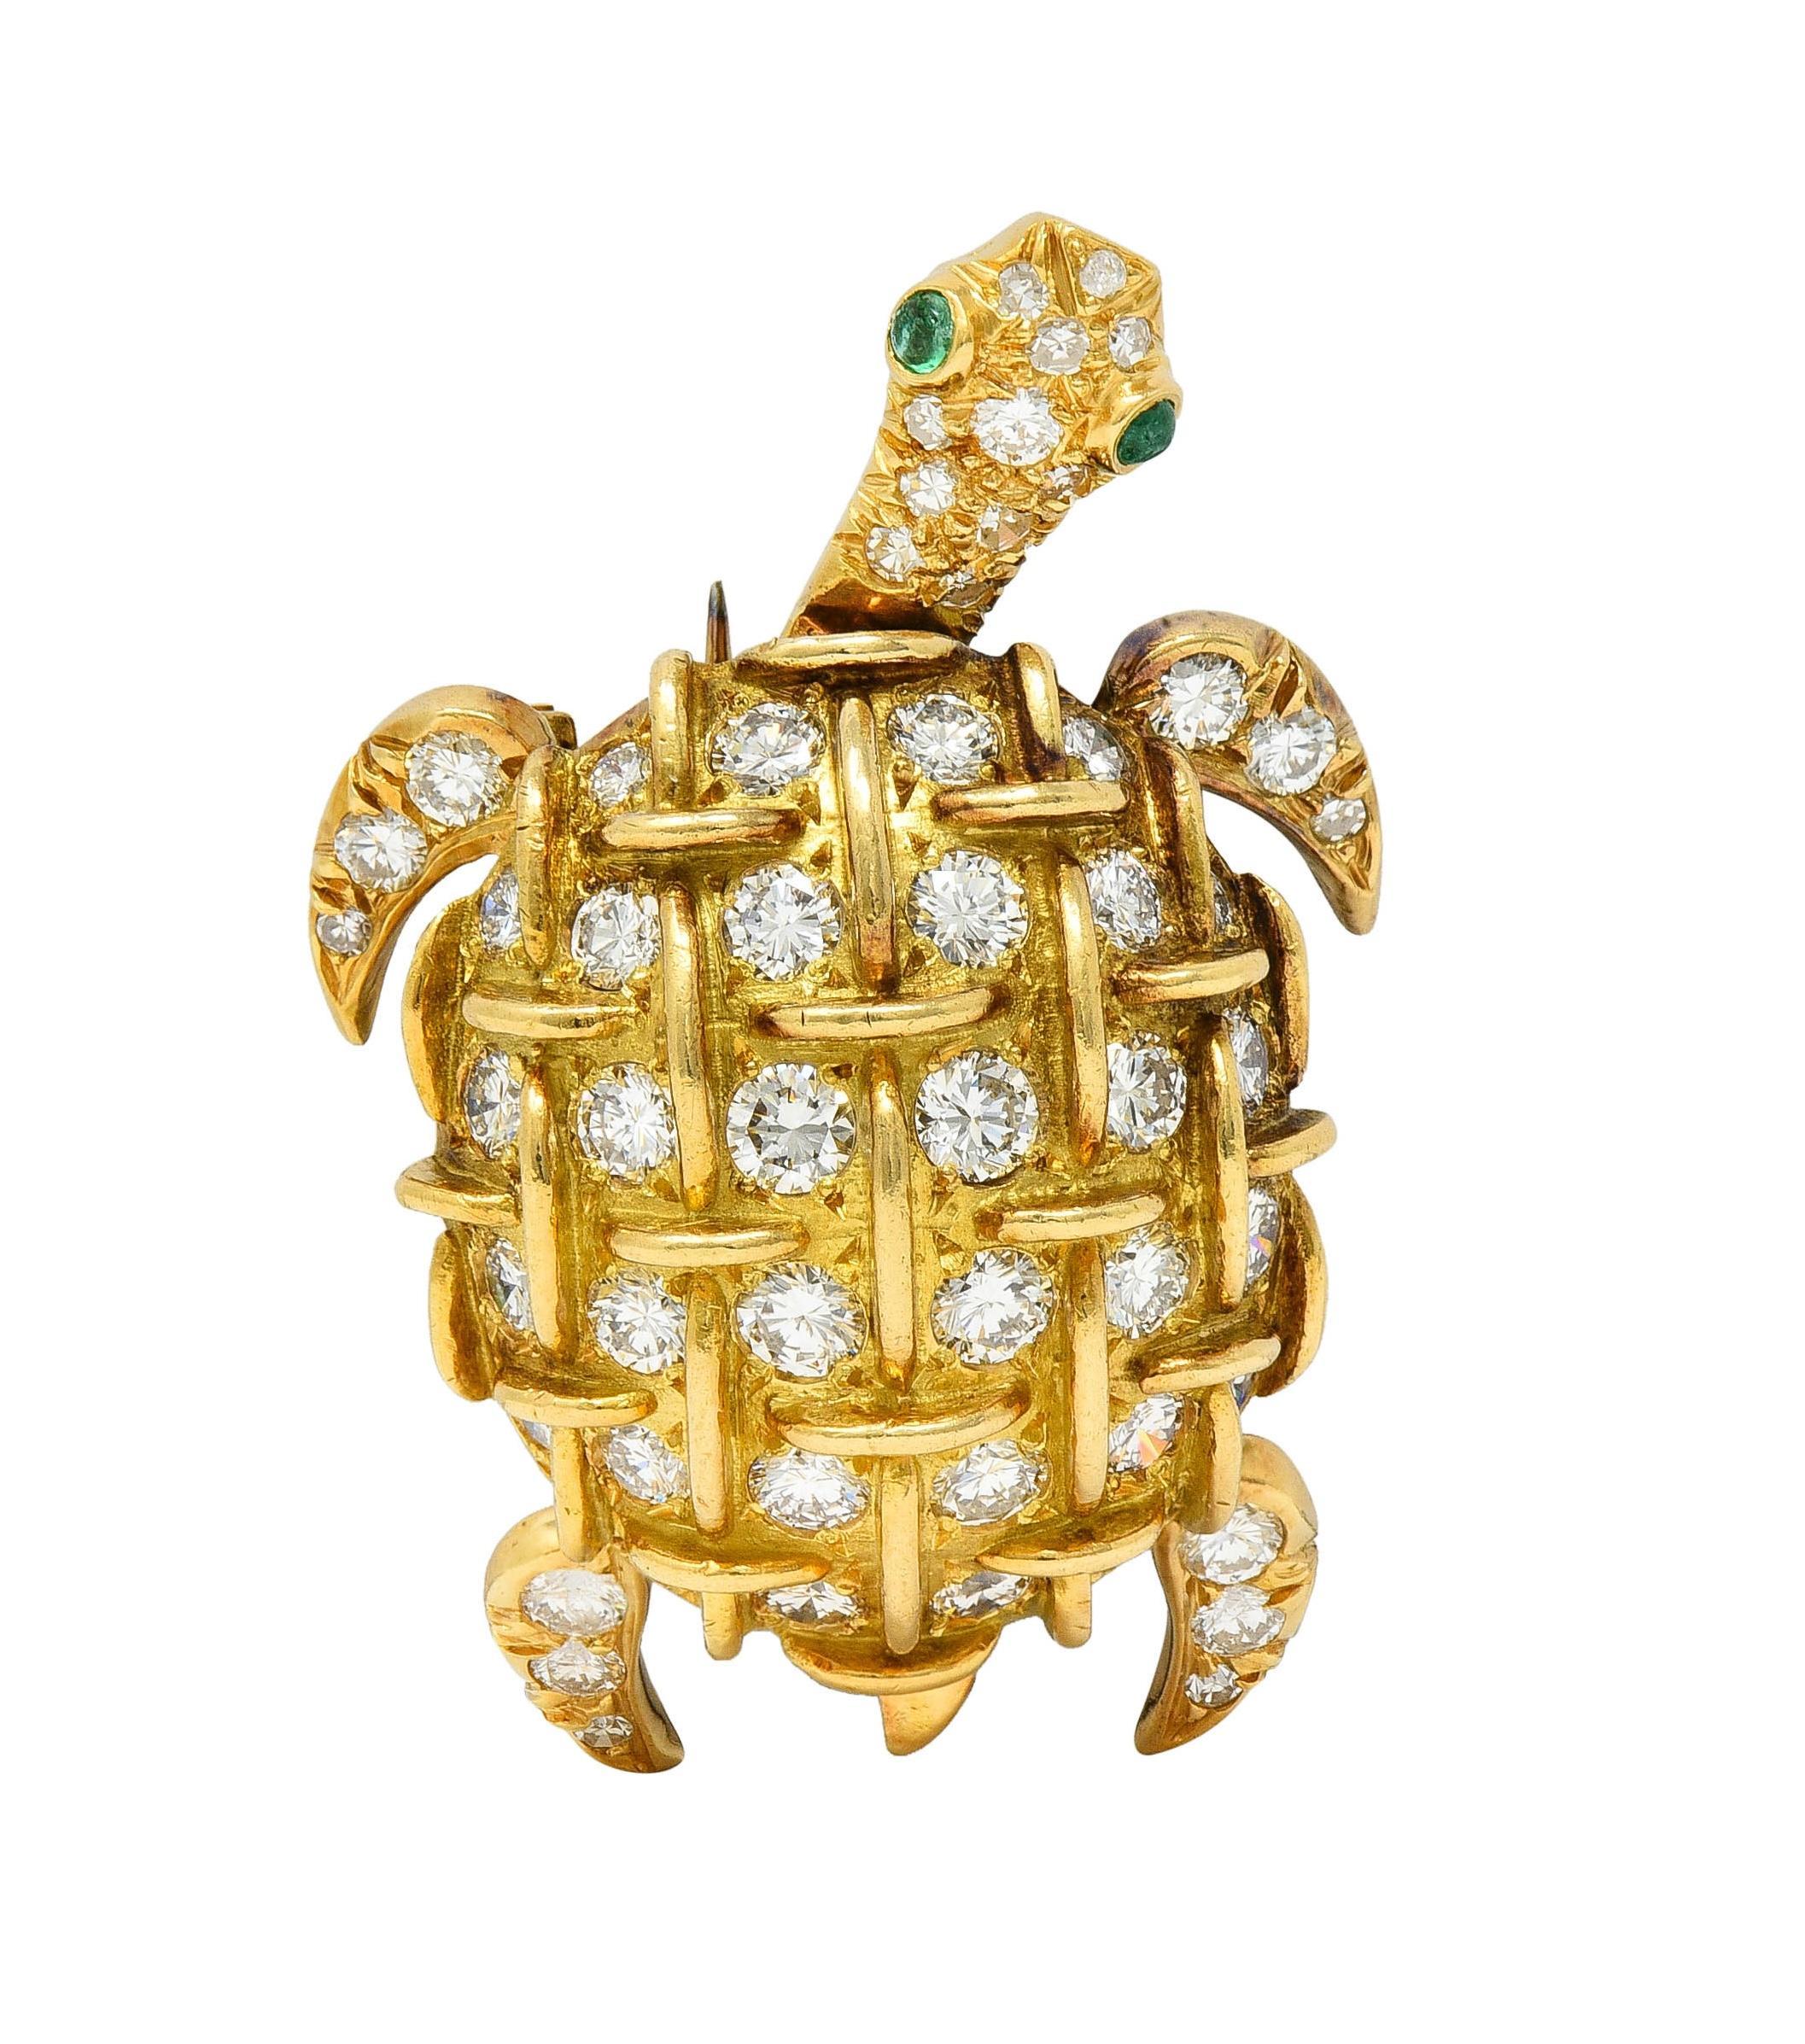 Designed as a stylized turtle with an articulating head and domed basket-weave motif shell
Featuring round brilliant cut diamonds bead set throughout the shell and body
Weighing approximately 3.36 carats total - G color with VS2 clarity
Accented by